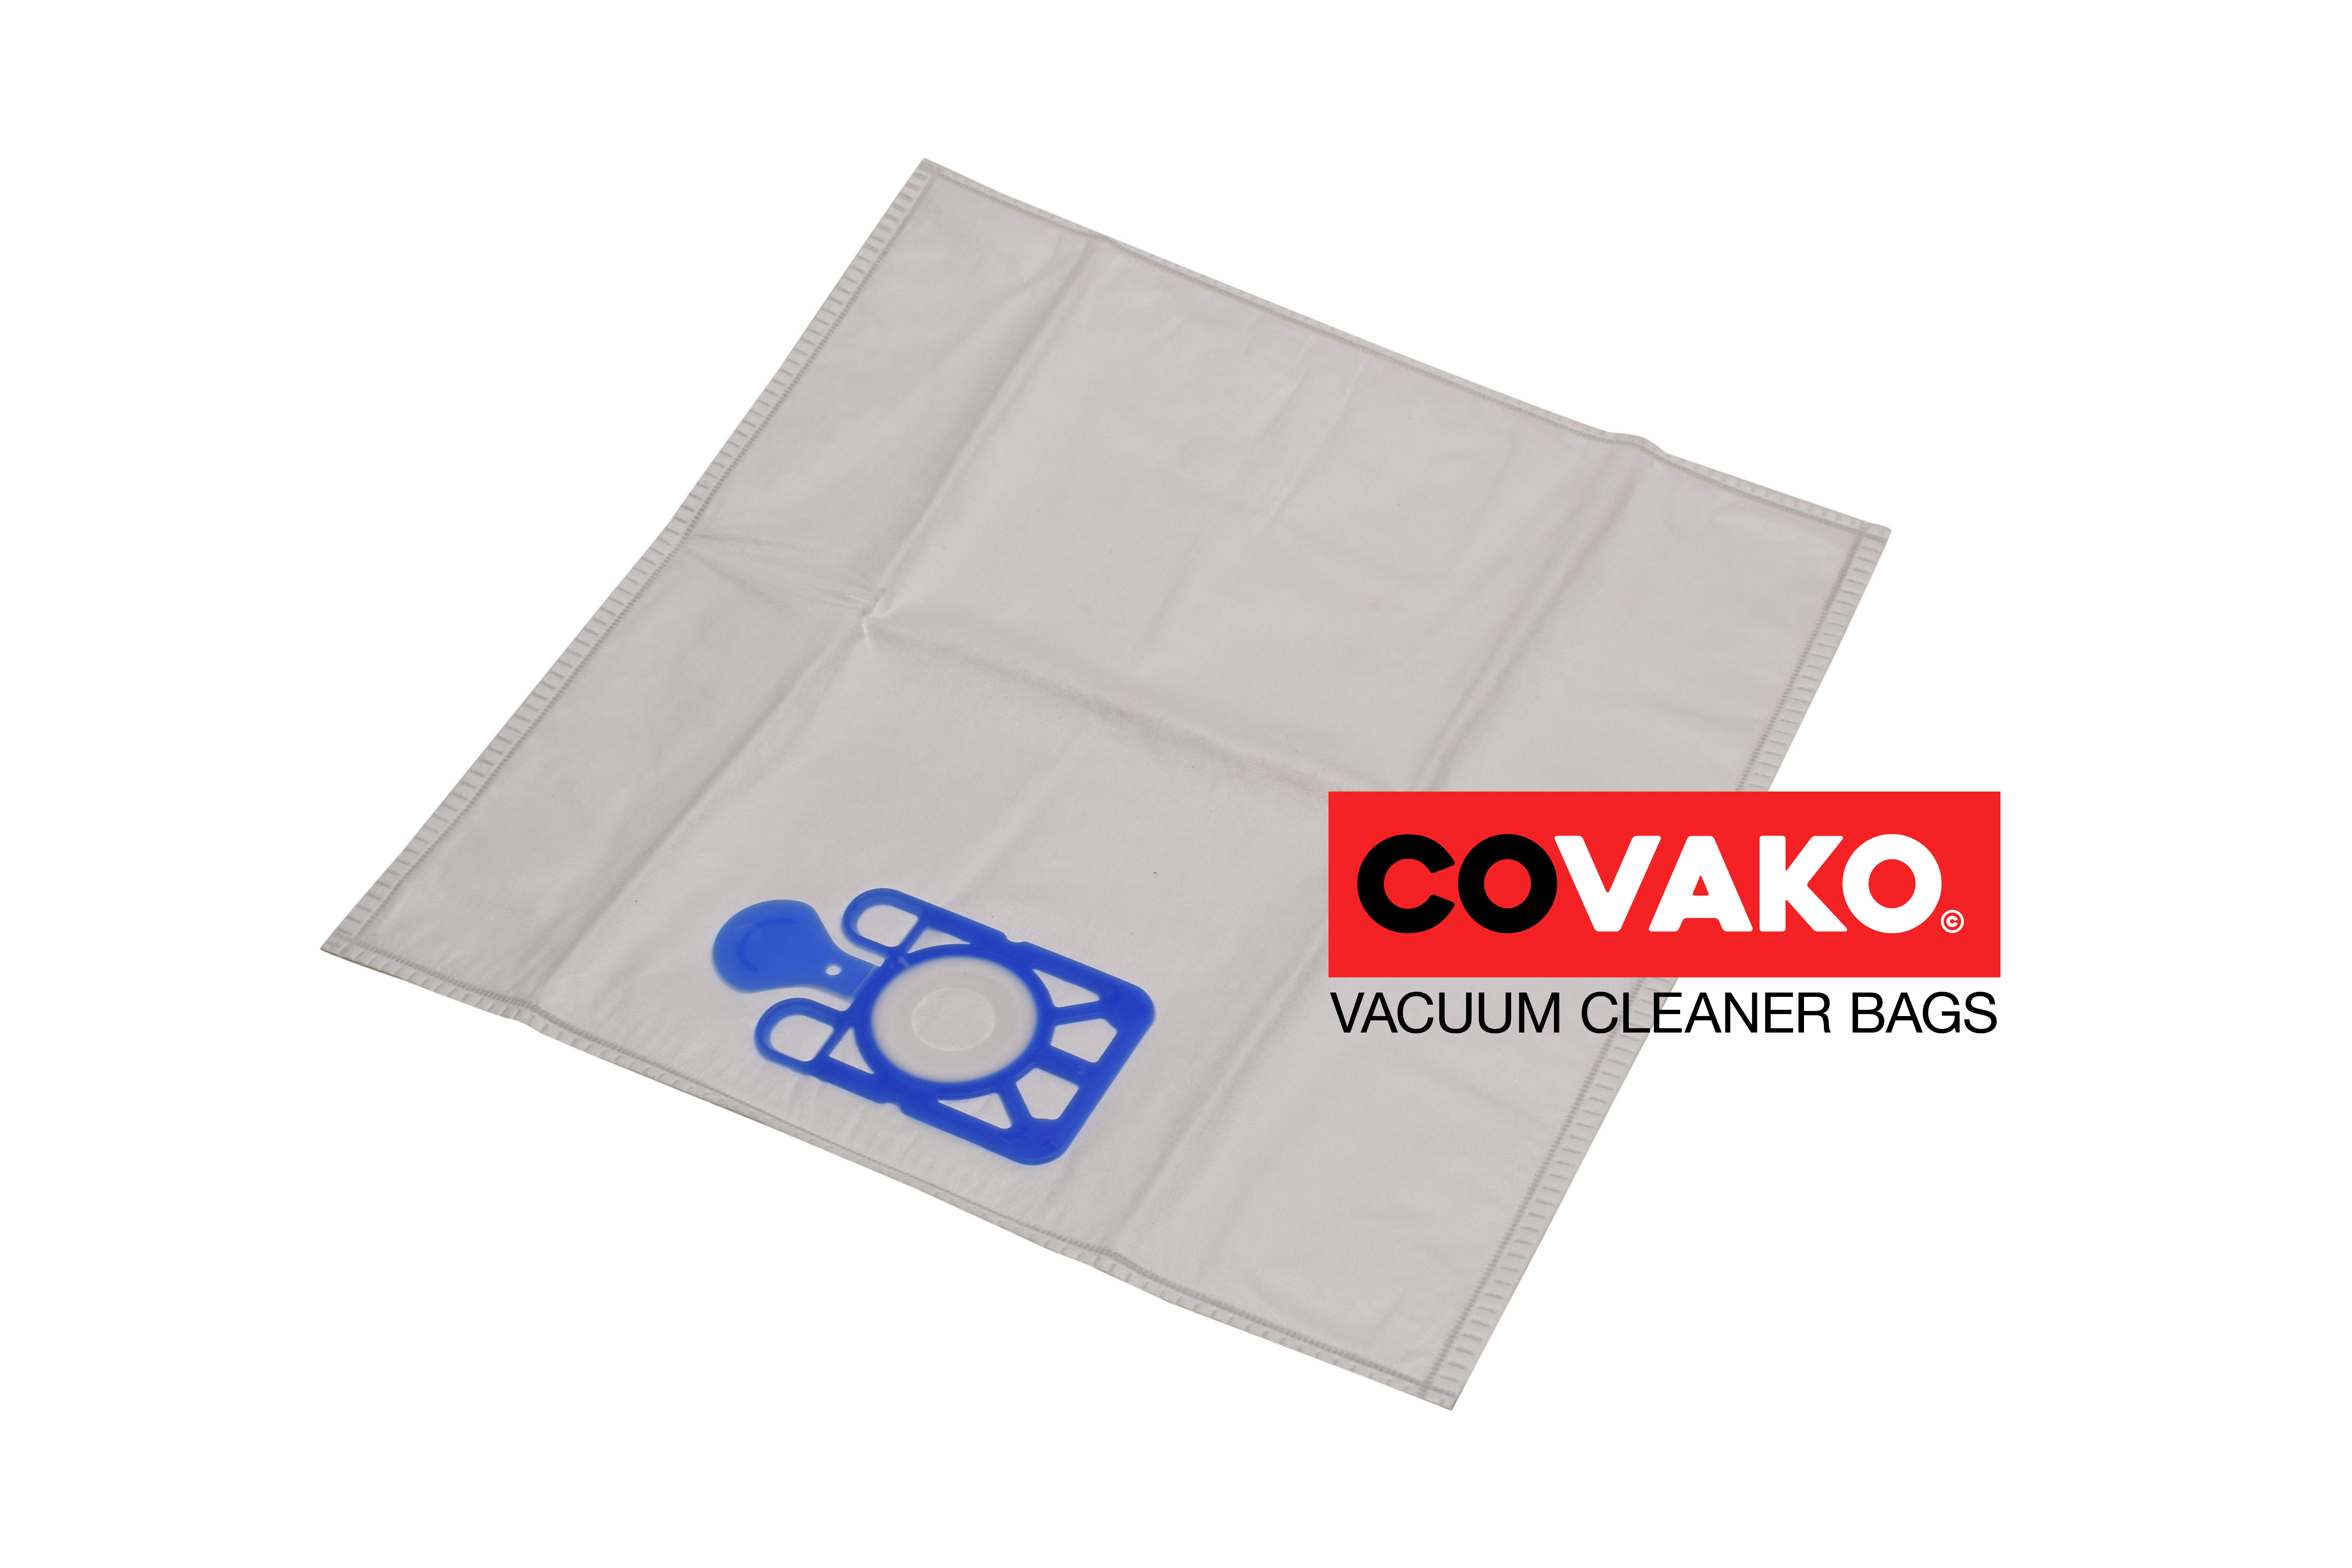 Numatic PPT 220-12 Trolly / Synthesis - Numatic vacuum cleaner bags